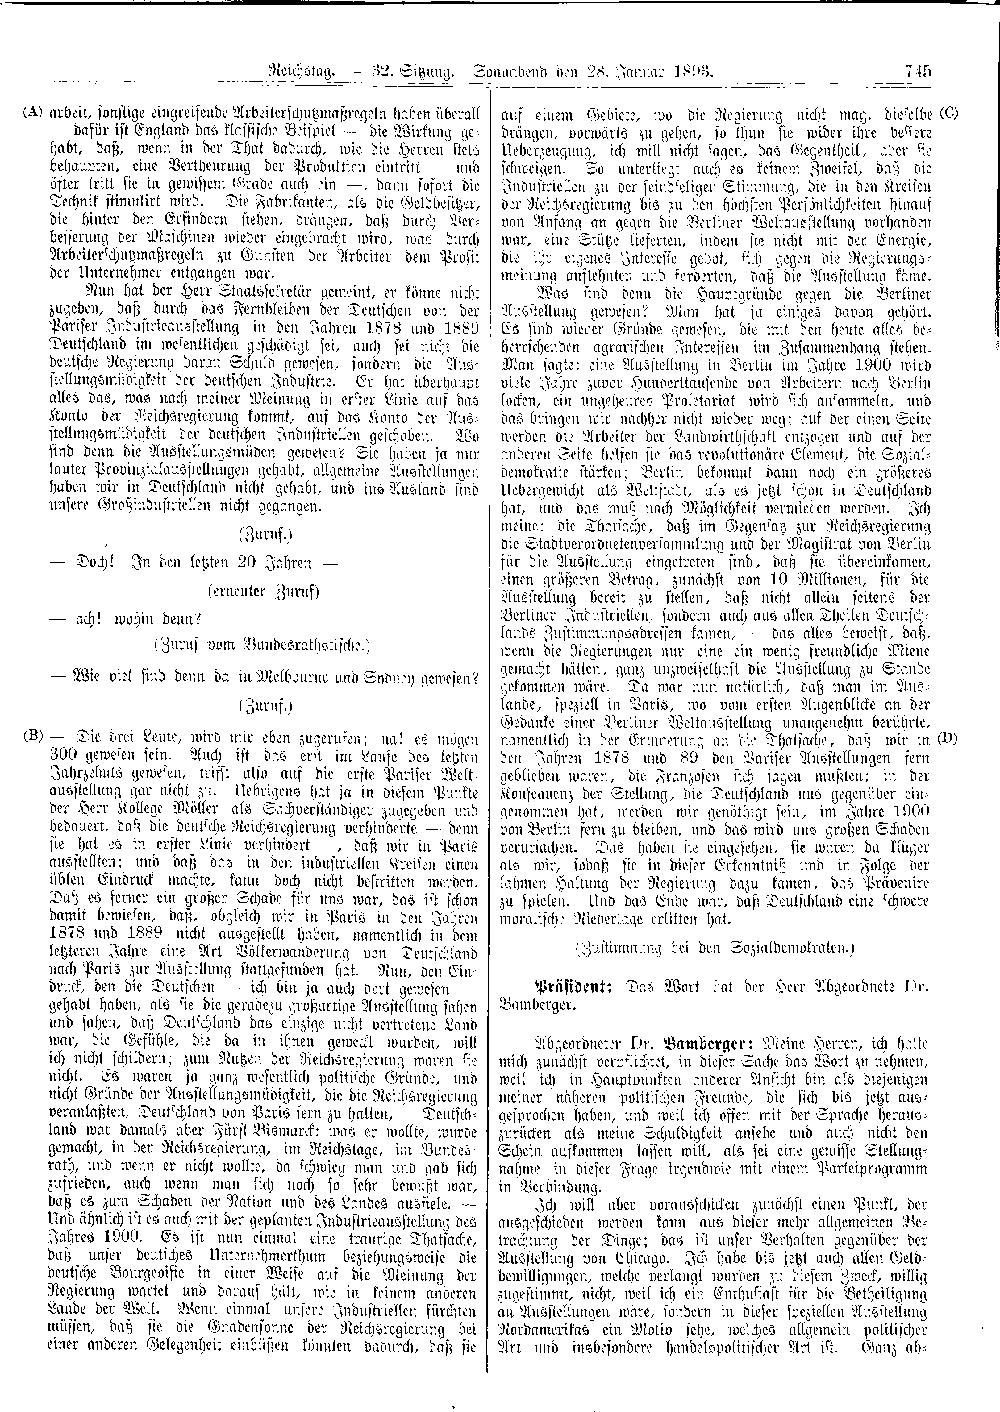 Scan of page 745